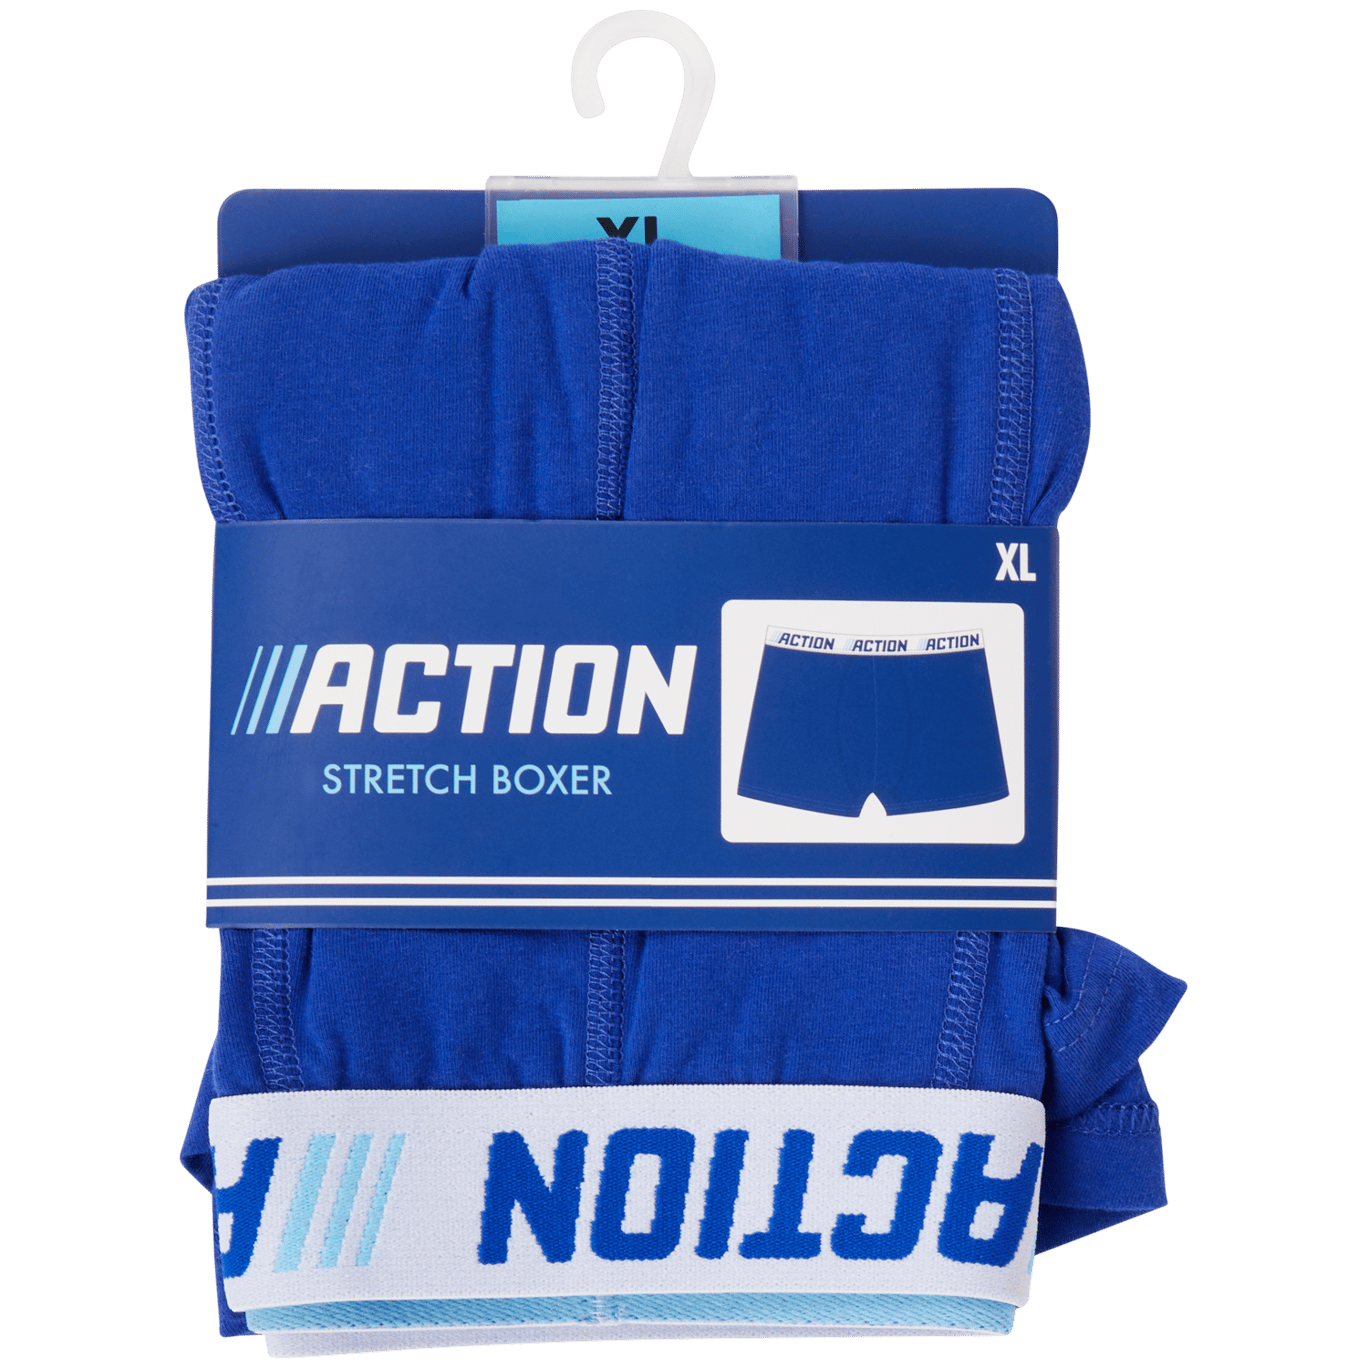 Action Action Boxershorts